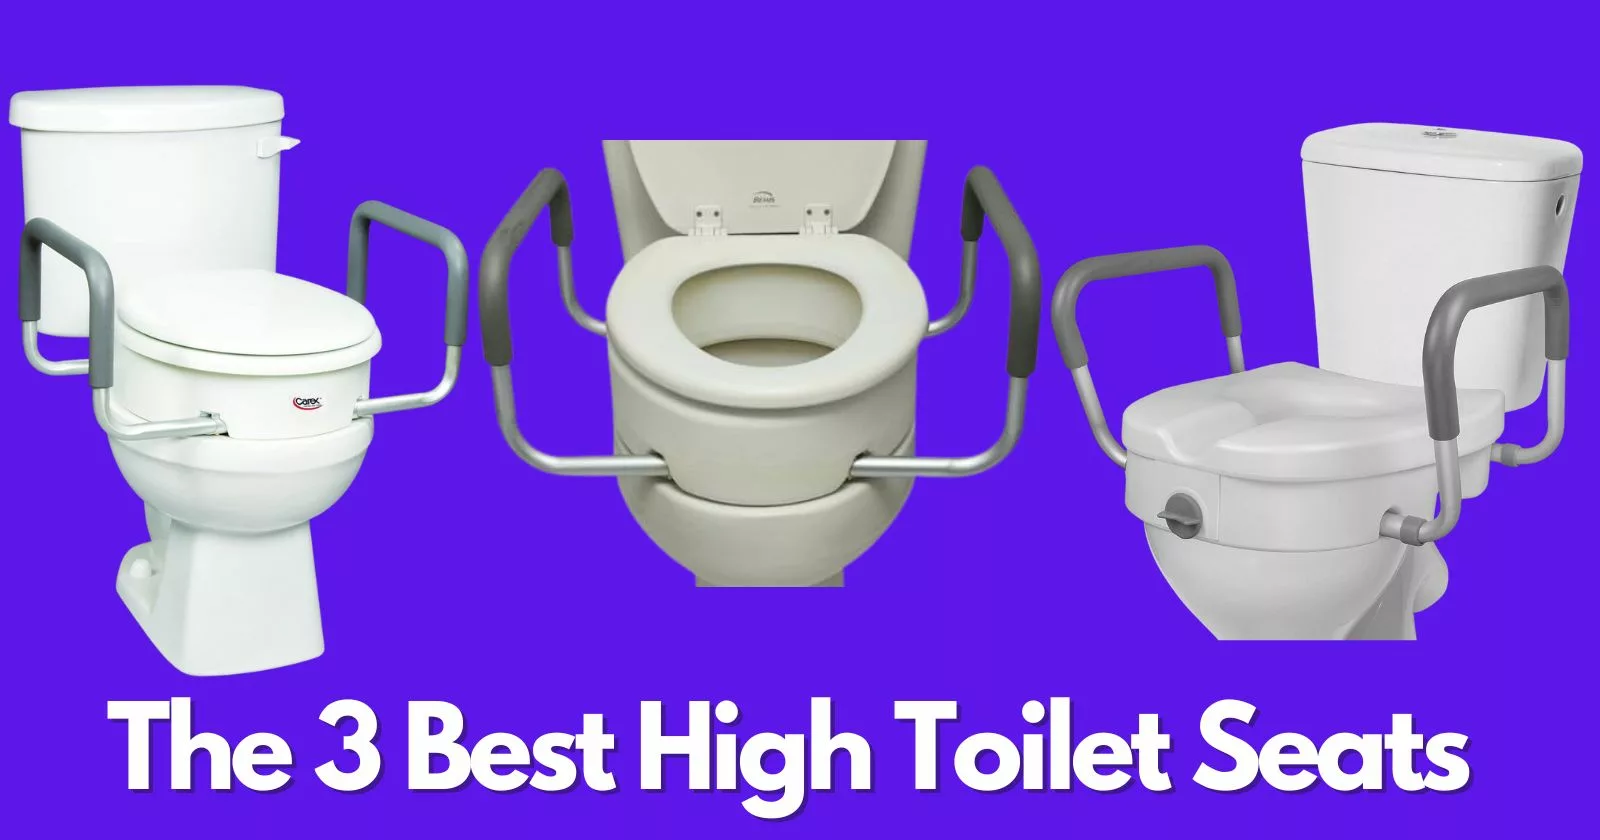 The 3 Best High Toilet Seats